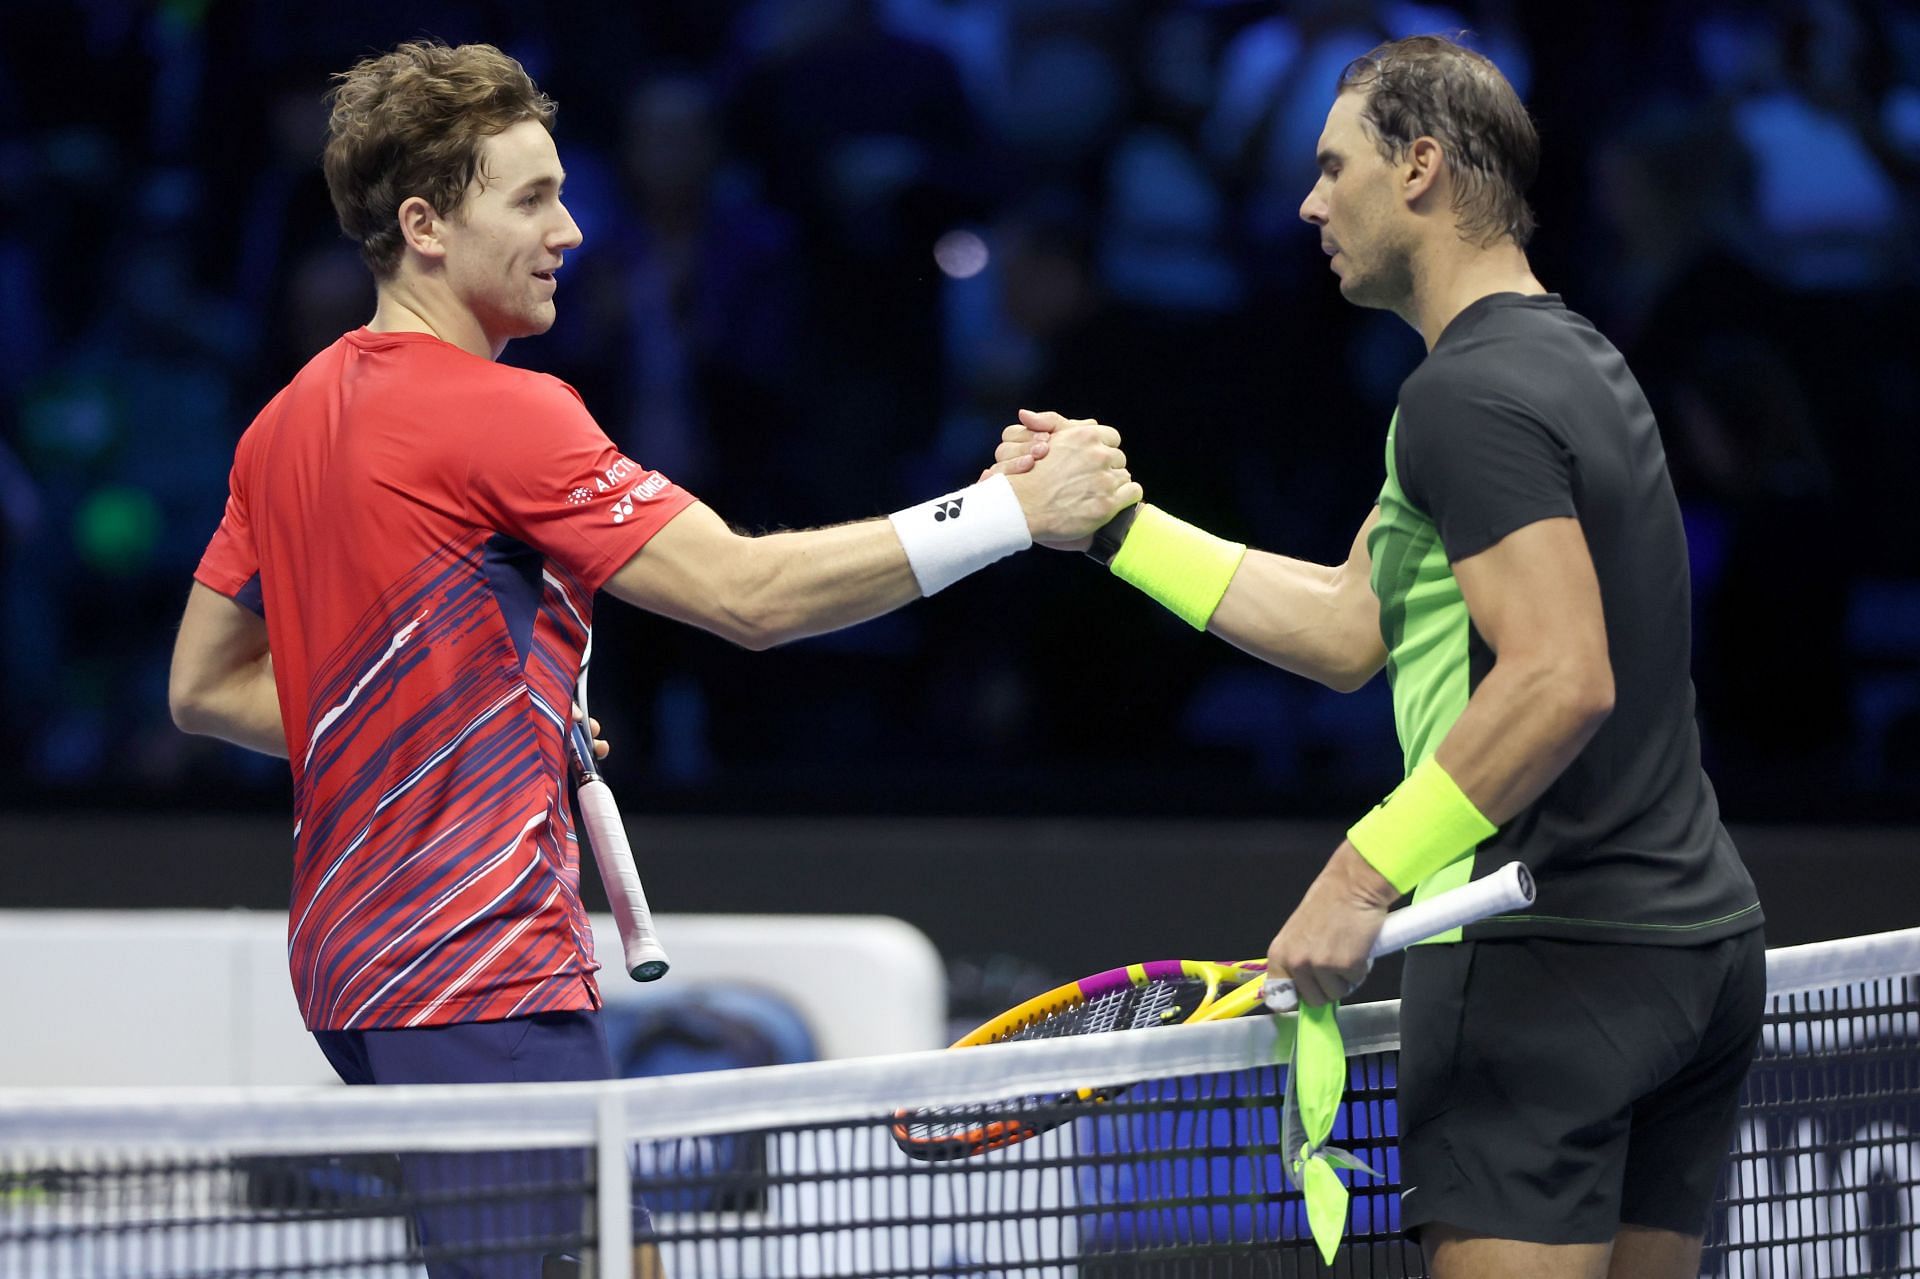 Casper Ruud (left) and Rafael Nadal are doing a South American tour.